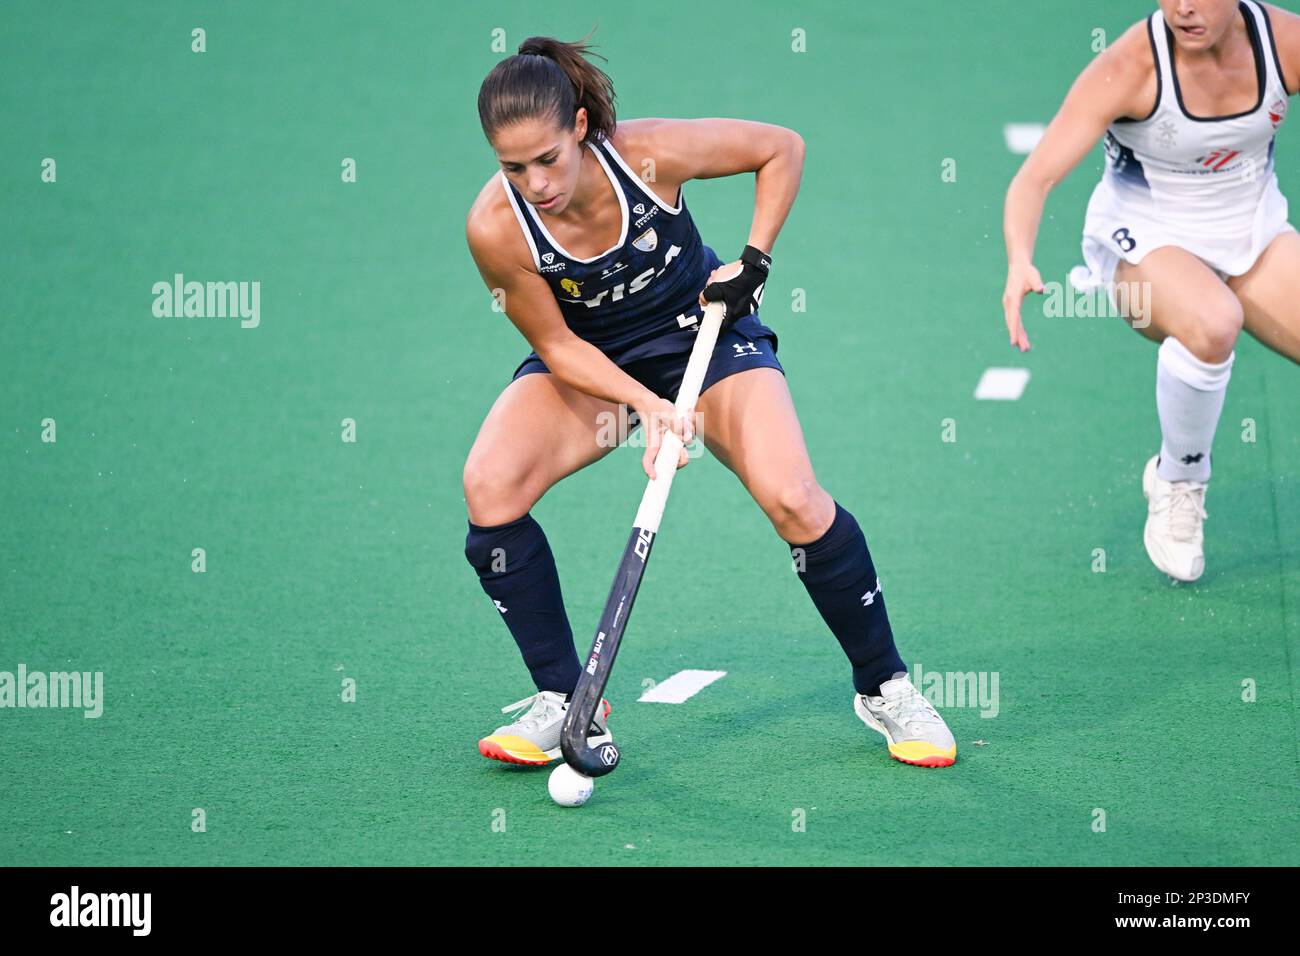 Lucina von der Heyde of Argentina Women's National field hockey team seen  in action during the 2022/23 International Hockey Federation (FIH) Women's  Pro-League match between USA and Argentina held at the Tasmanian